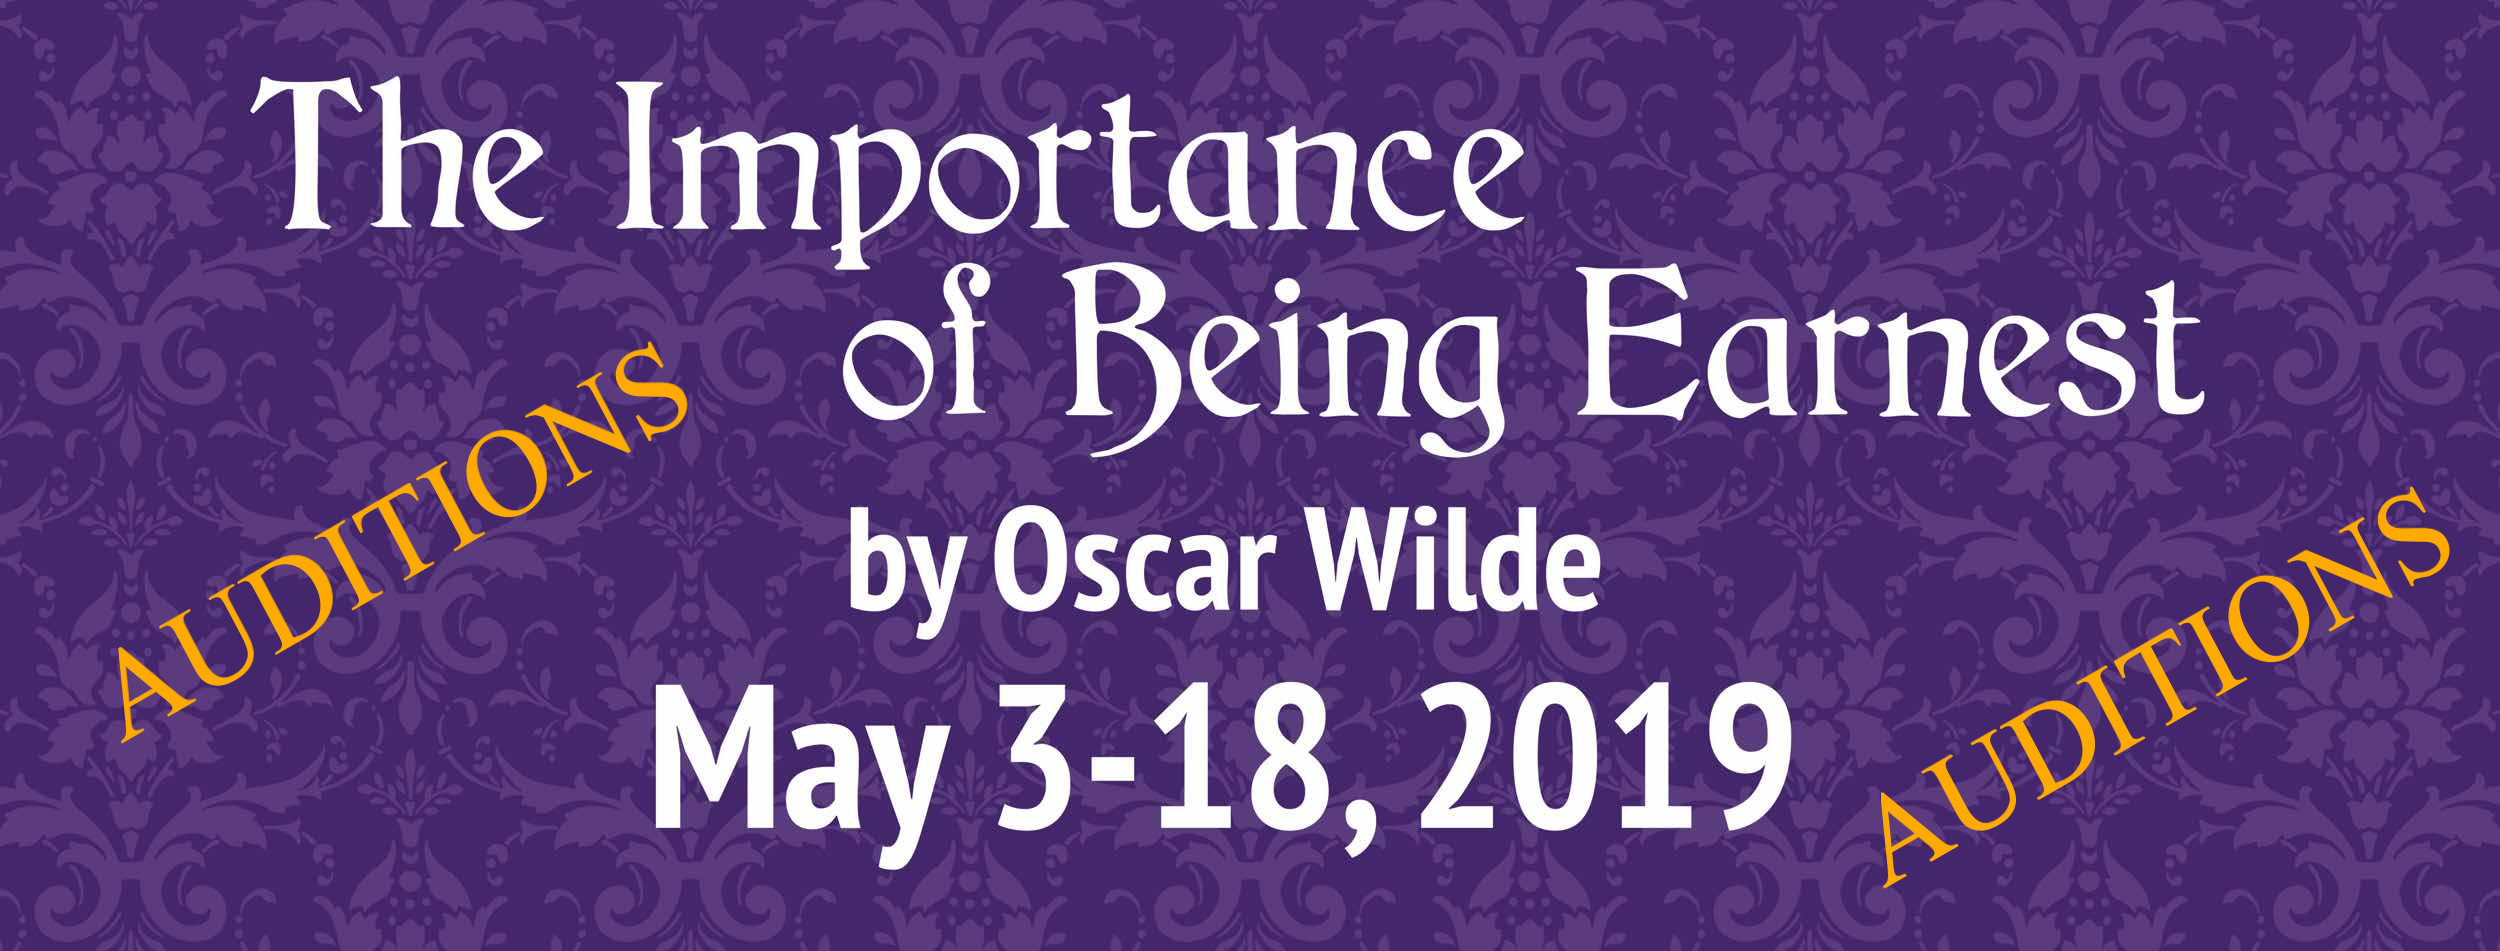 The importance of Being Earnest Auditions